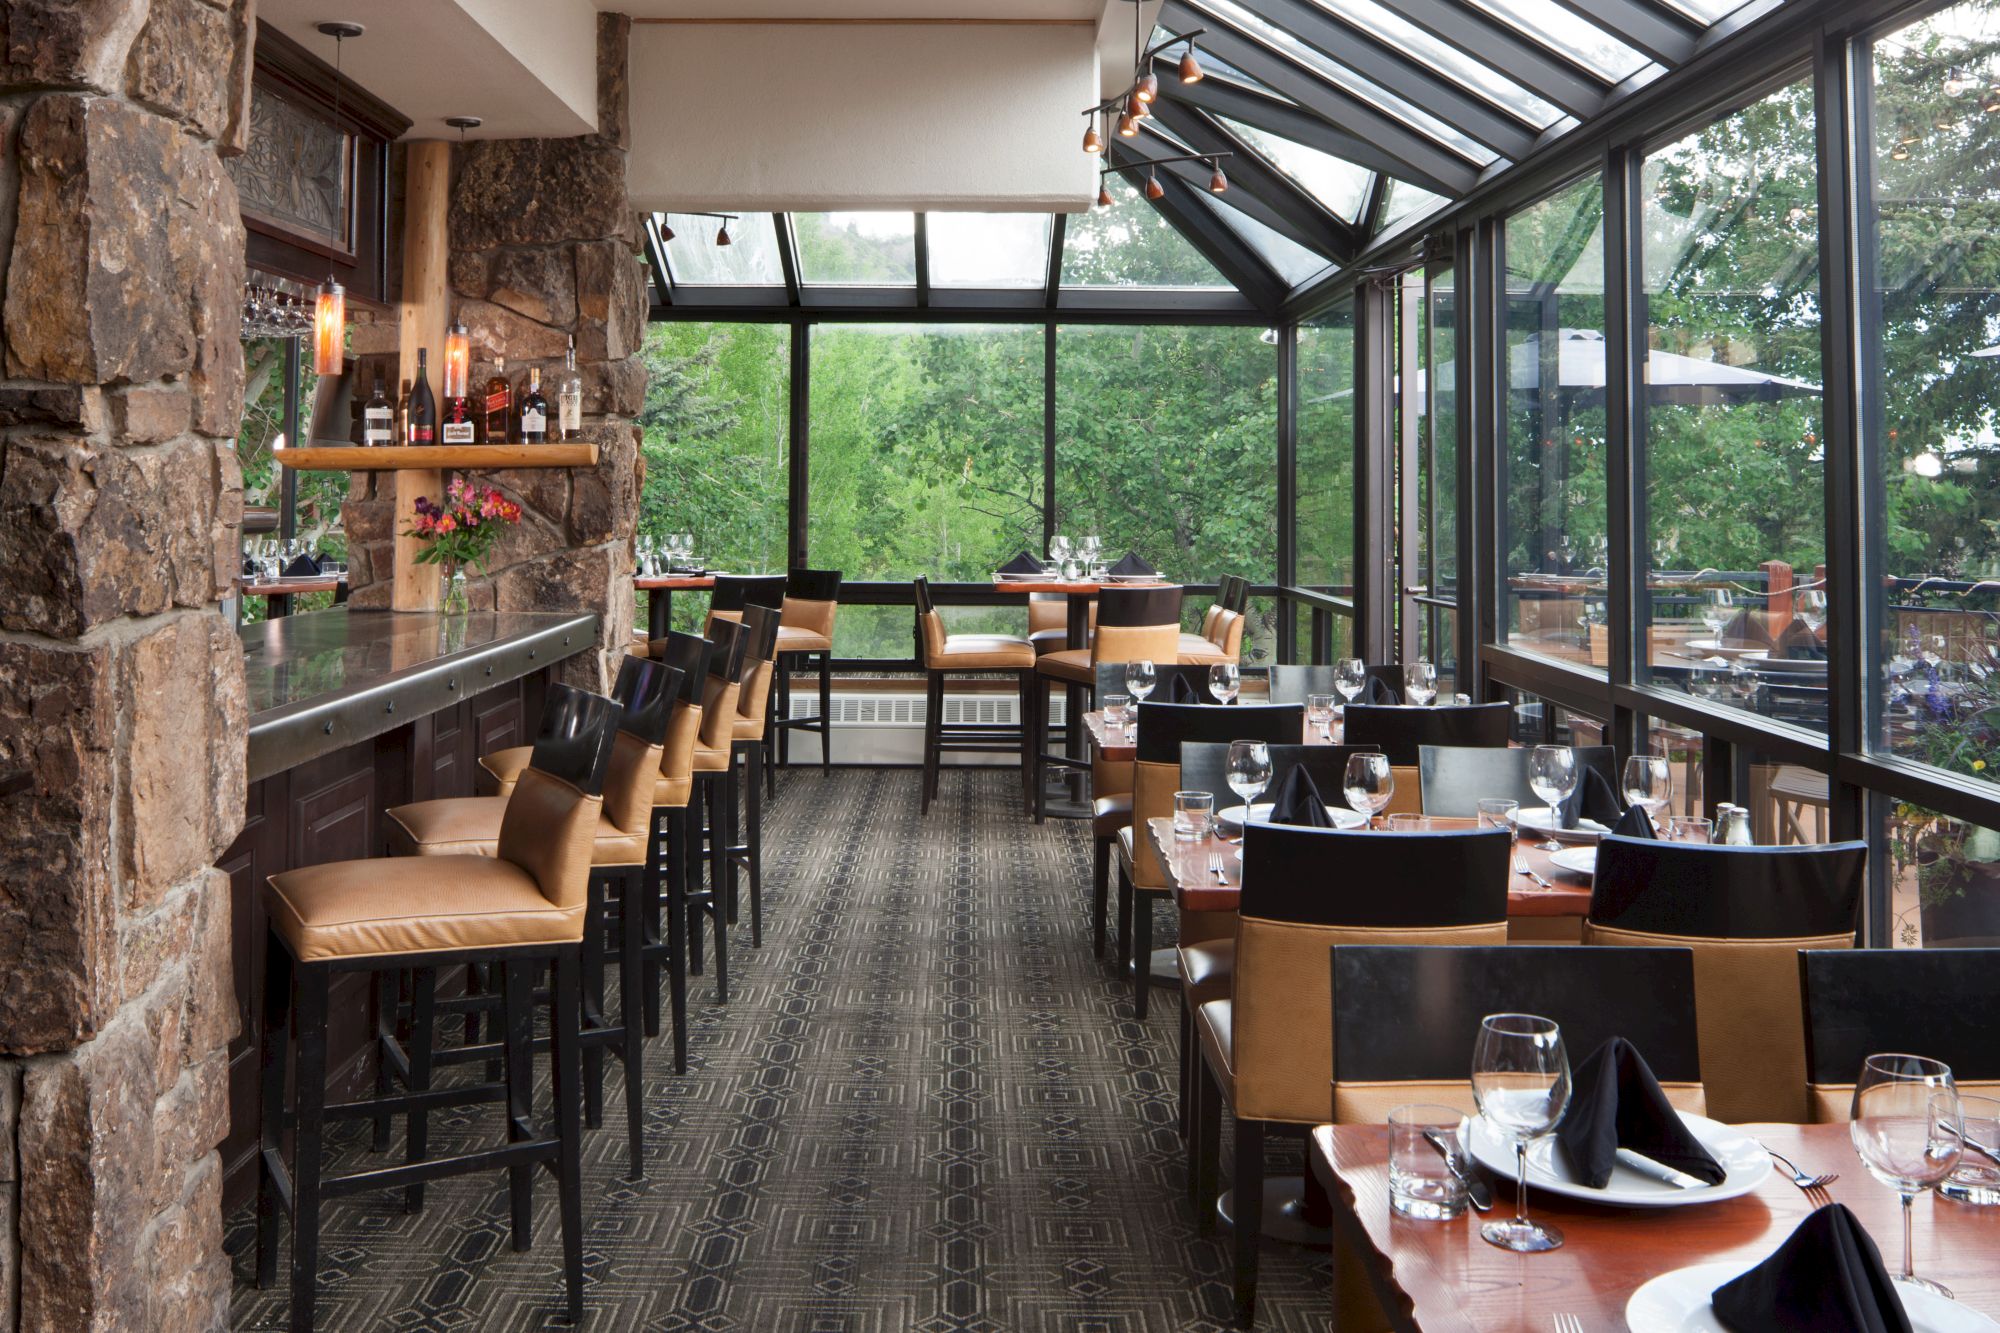 An elegant restaurant with a stone wall, bar seating, dining tables, large windows, and a view of trees. Table settings include napkins and glasses.